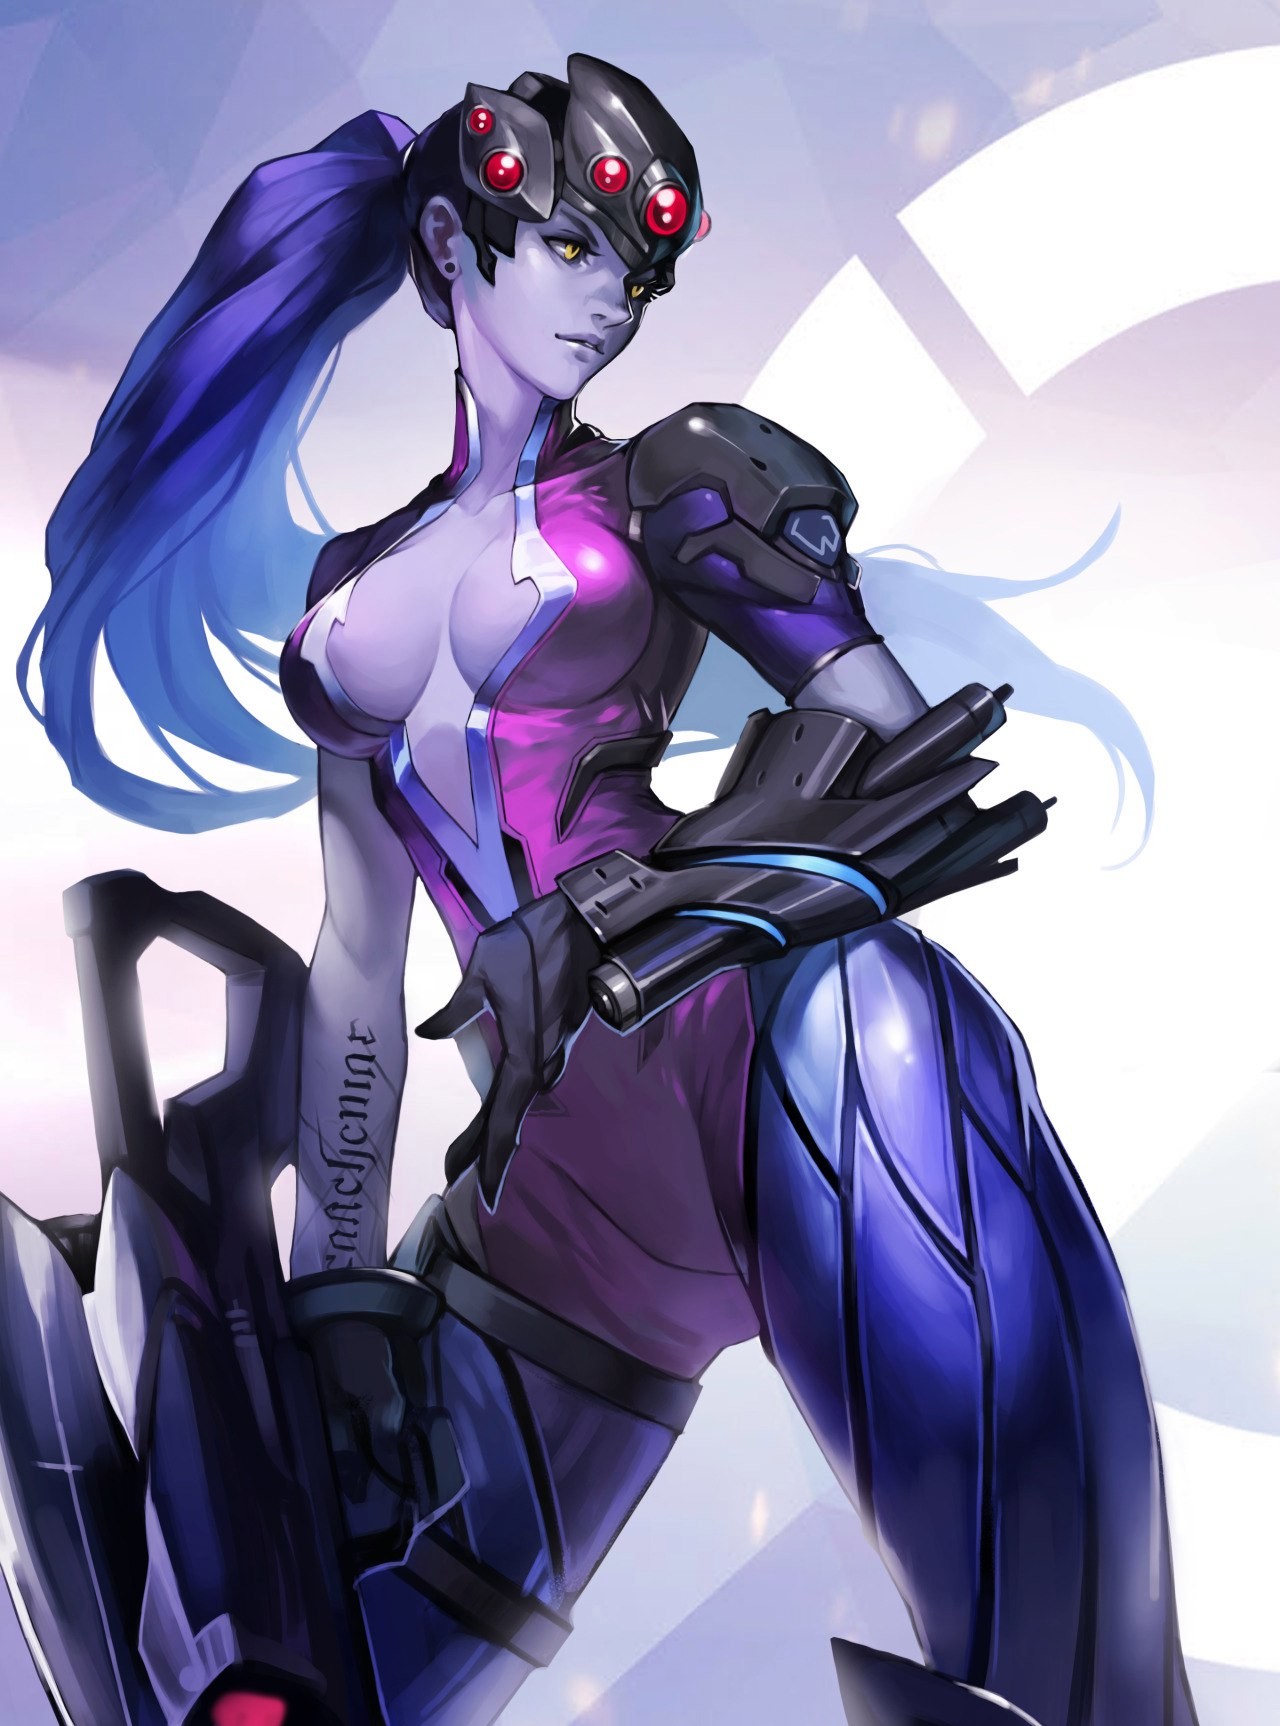 Anime 1280x1726 Widowmaker (Overwatch) Overwatch video games boobs Futuristic Weapons girls with guns purple hair long hair video game girls PC gaming video game characters fan art yellow eyes